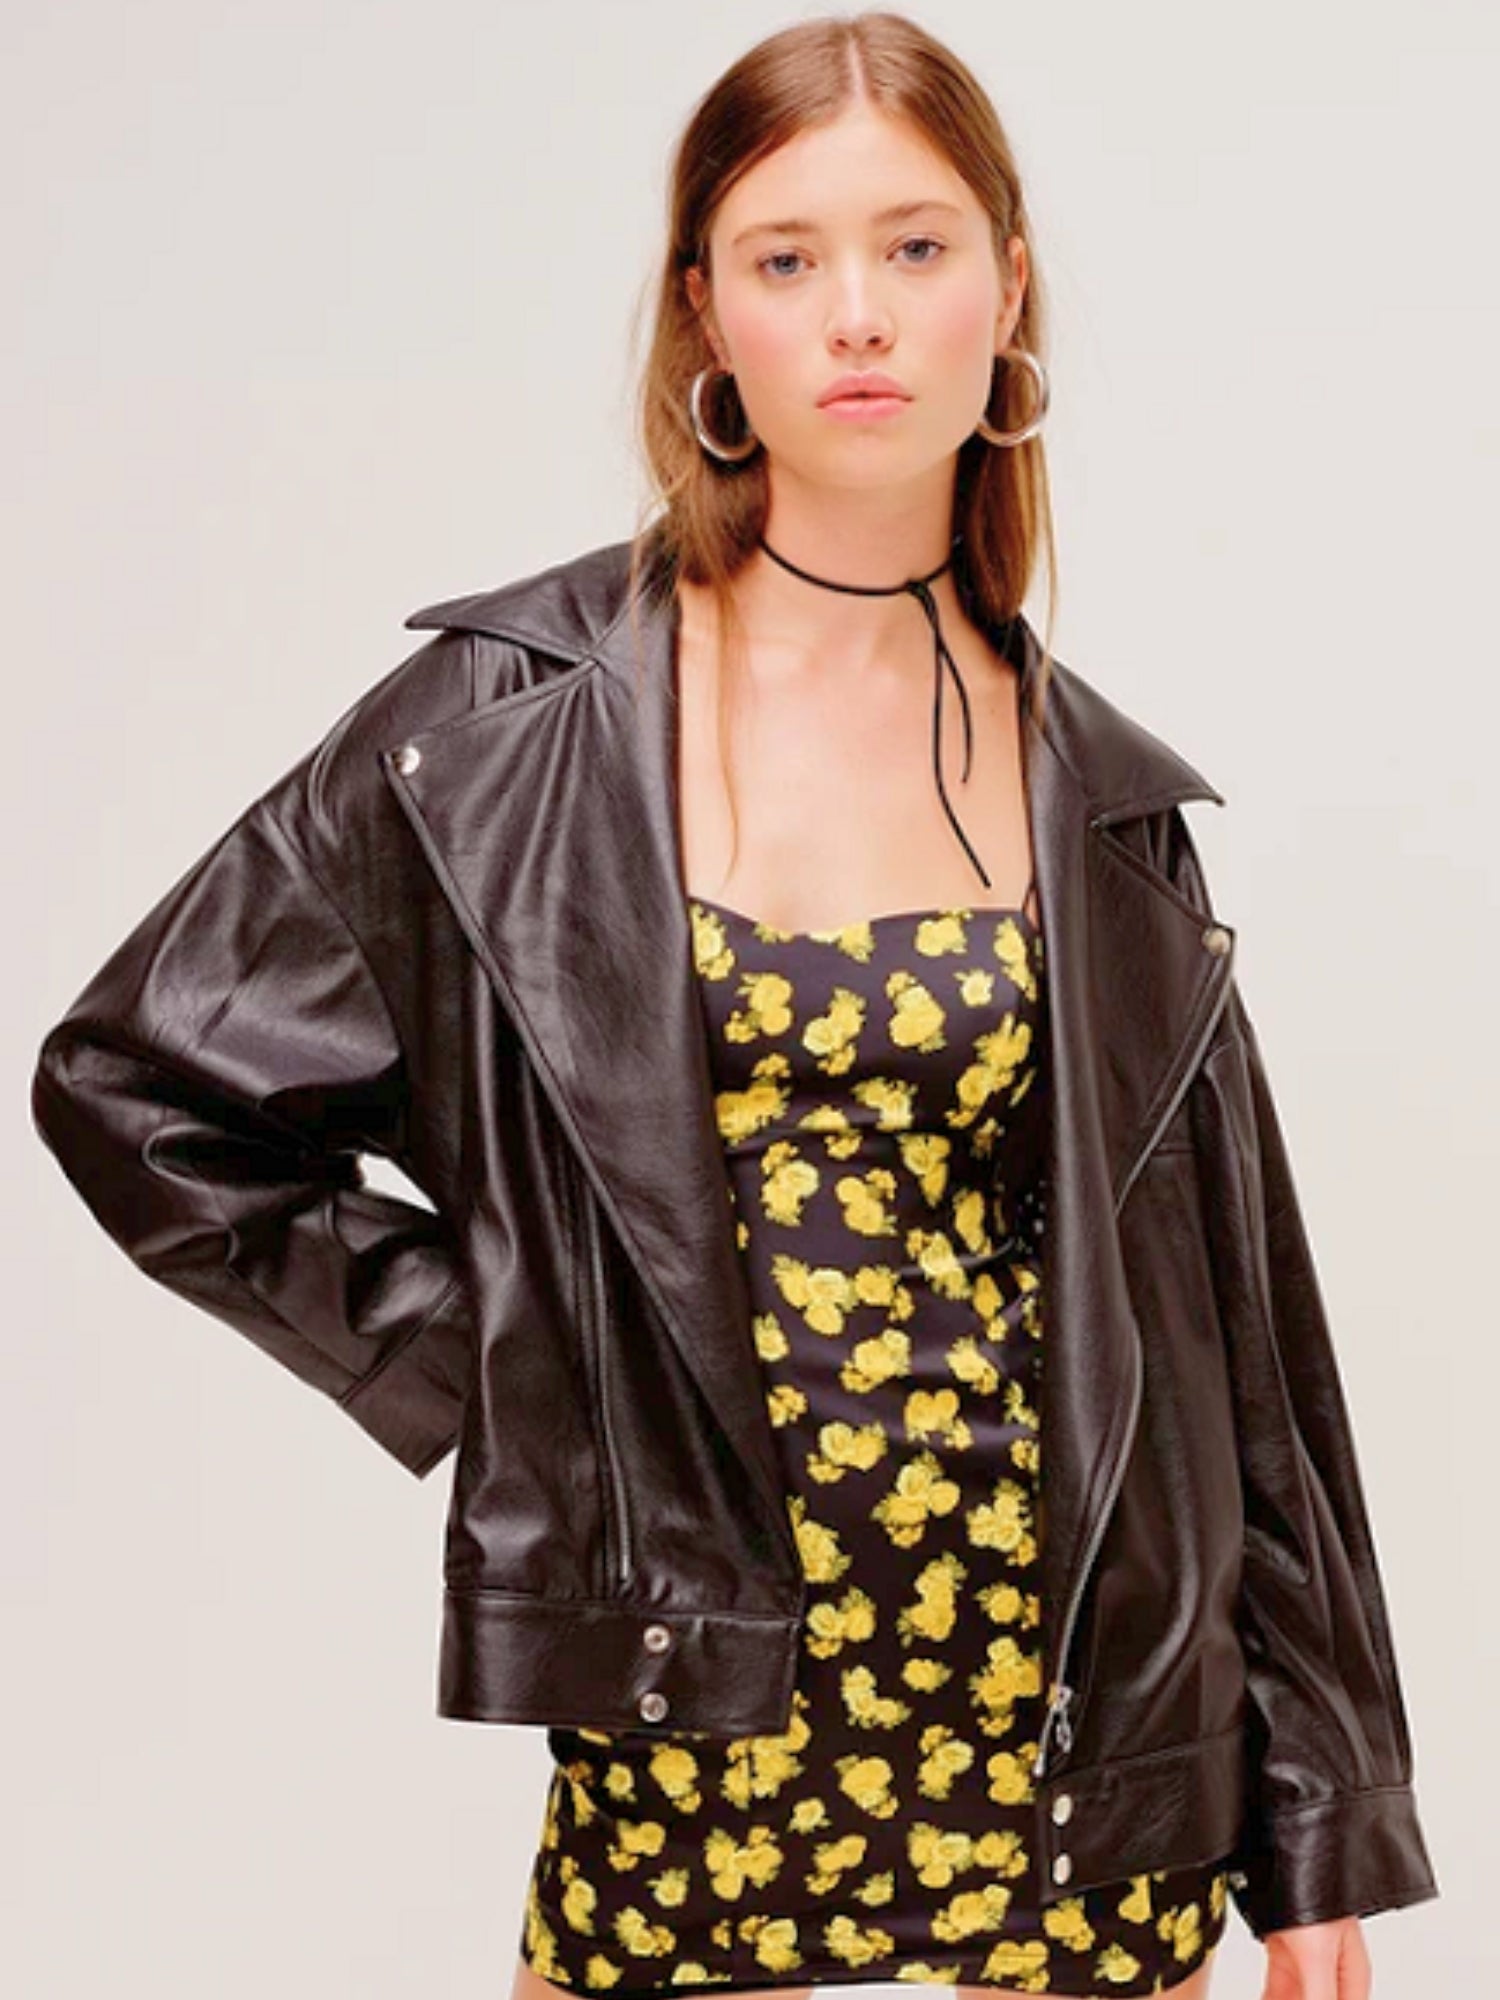 The Dillon Moto Jacket - The Dillon Jacket by For Love and Lemons is a must have for every moto jacket lover. Made of a faux leather, this oversized jacket is an icon in itself that can be paired with absolutely anything. Pair this with a Selkie Puff Dres